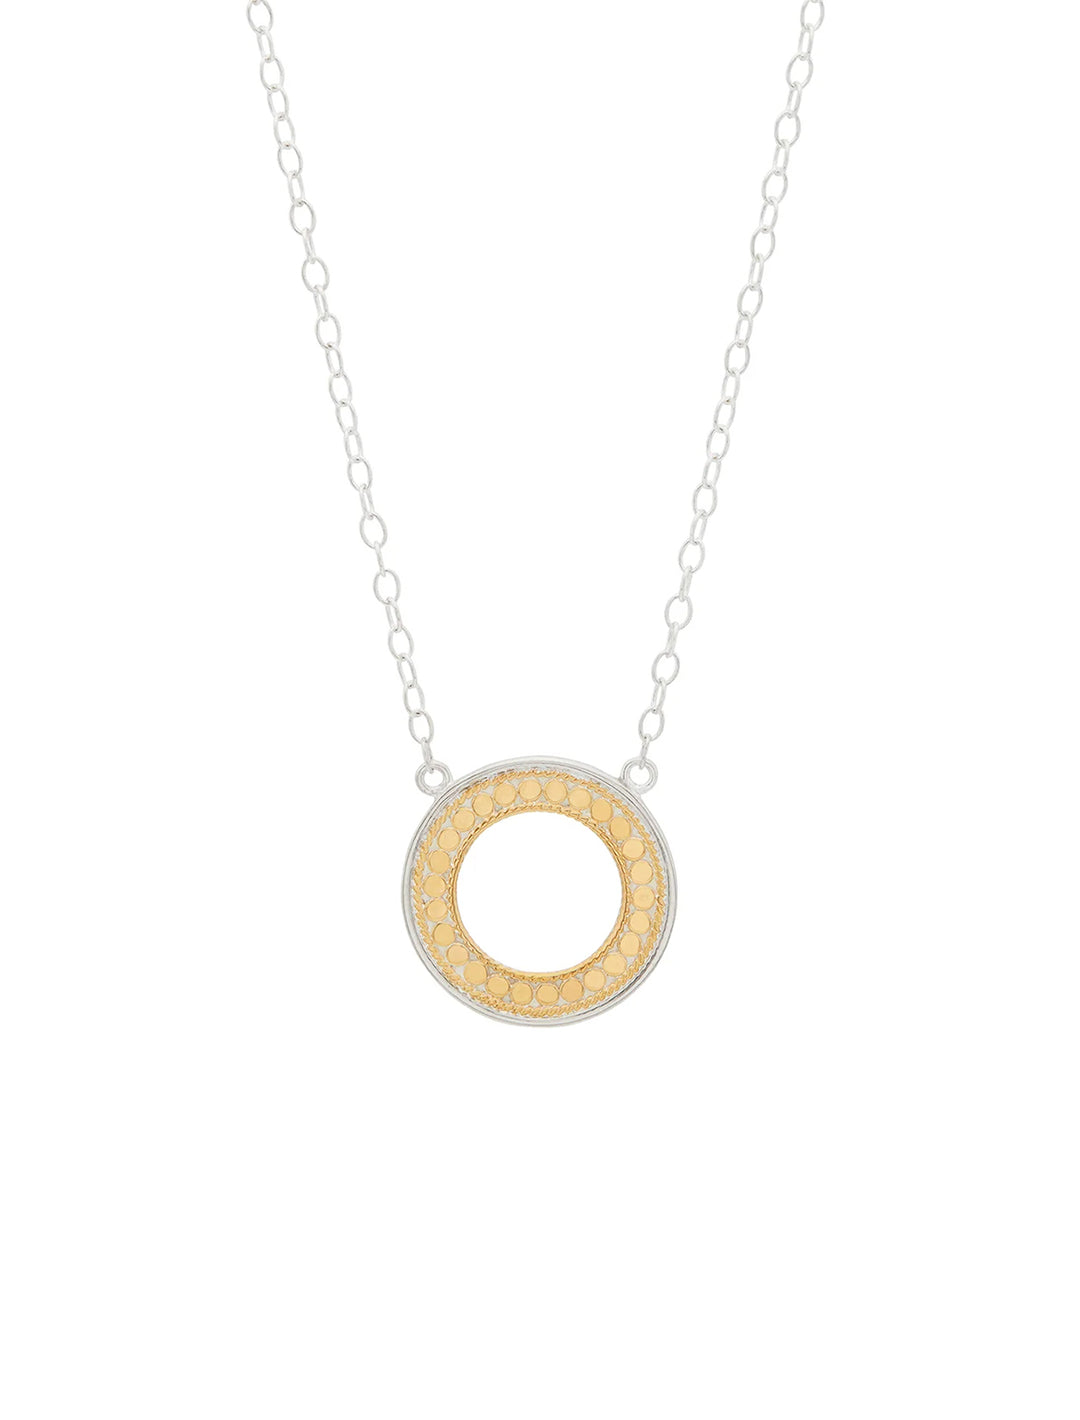 Front view of Anna Beck's classic open circle necklace | 16-18".